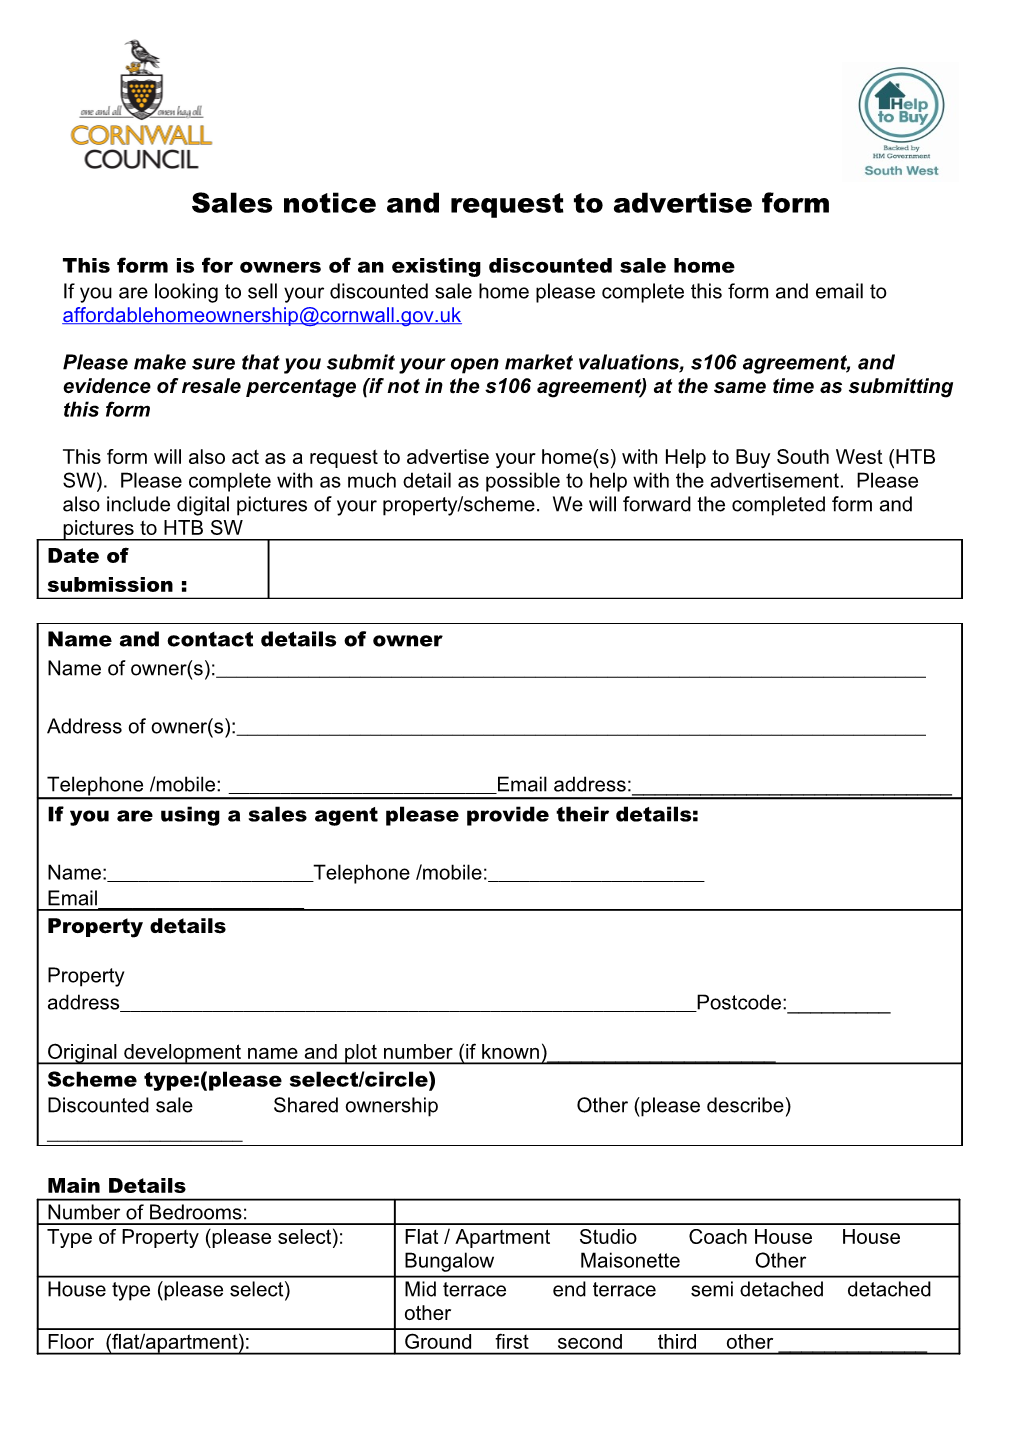 Sales Notice and Request to Advertise Form